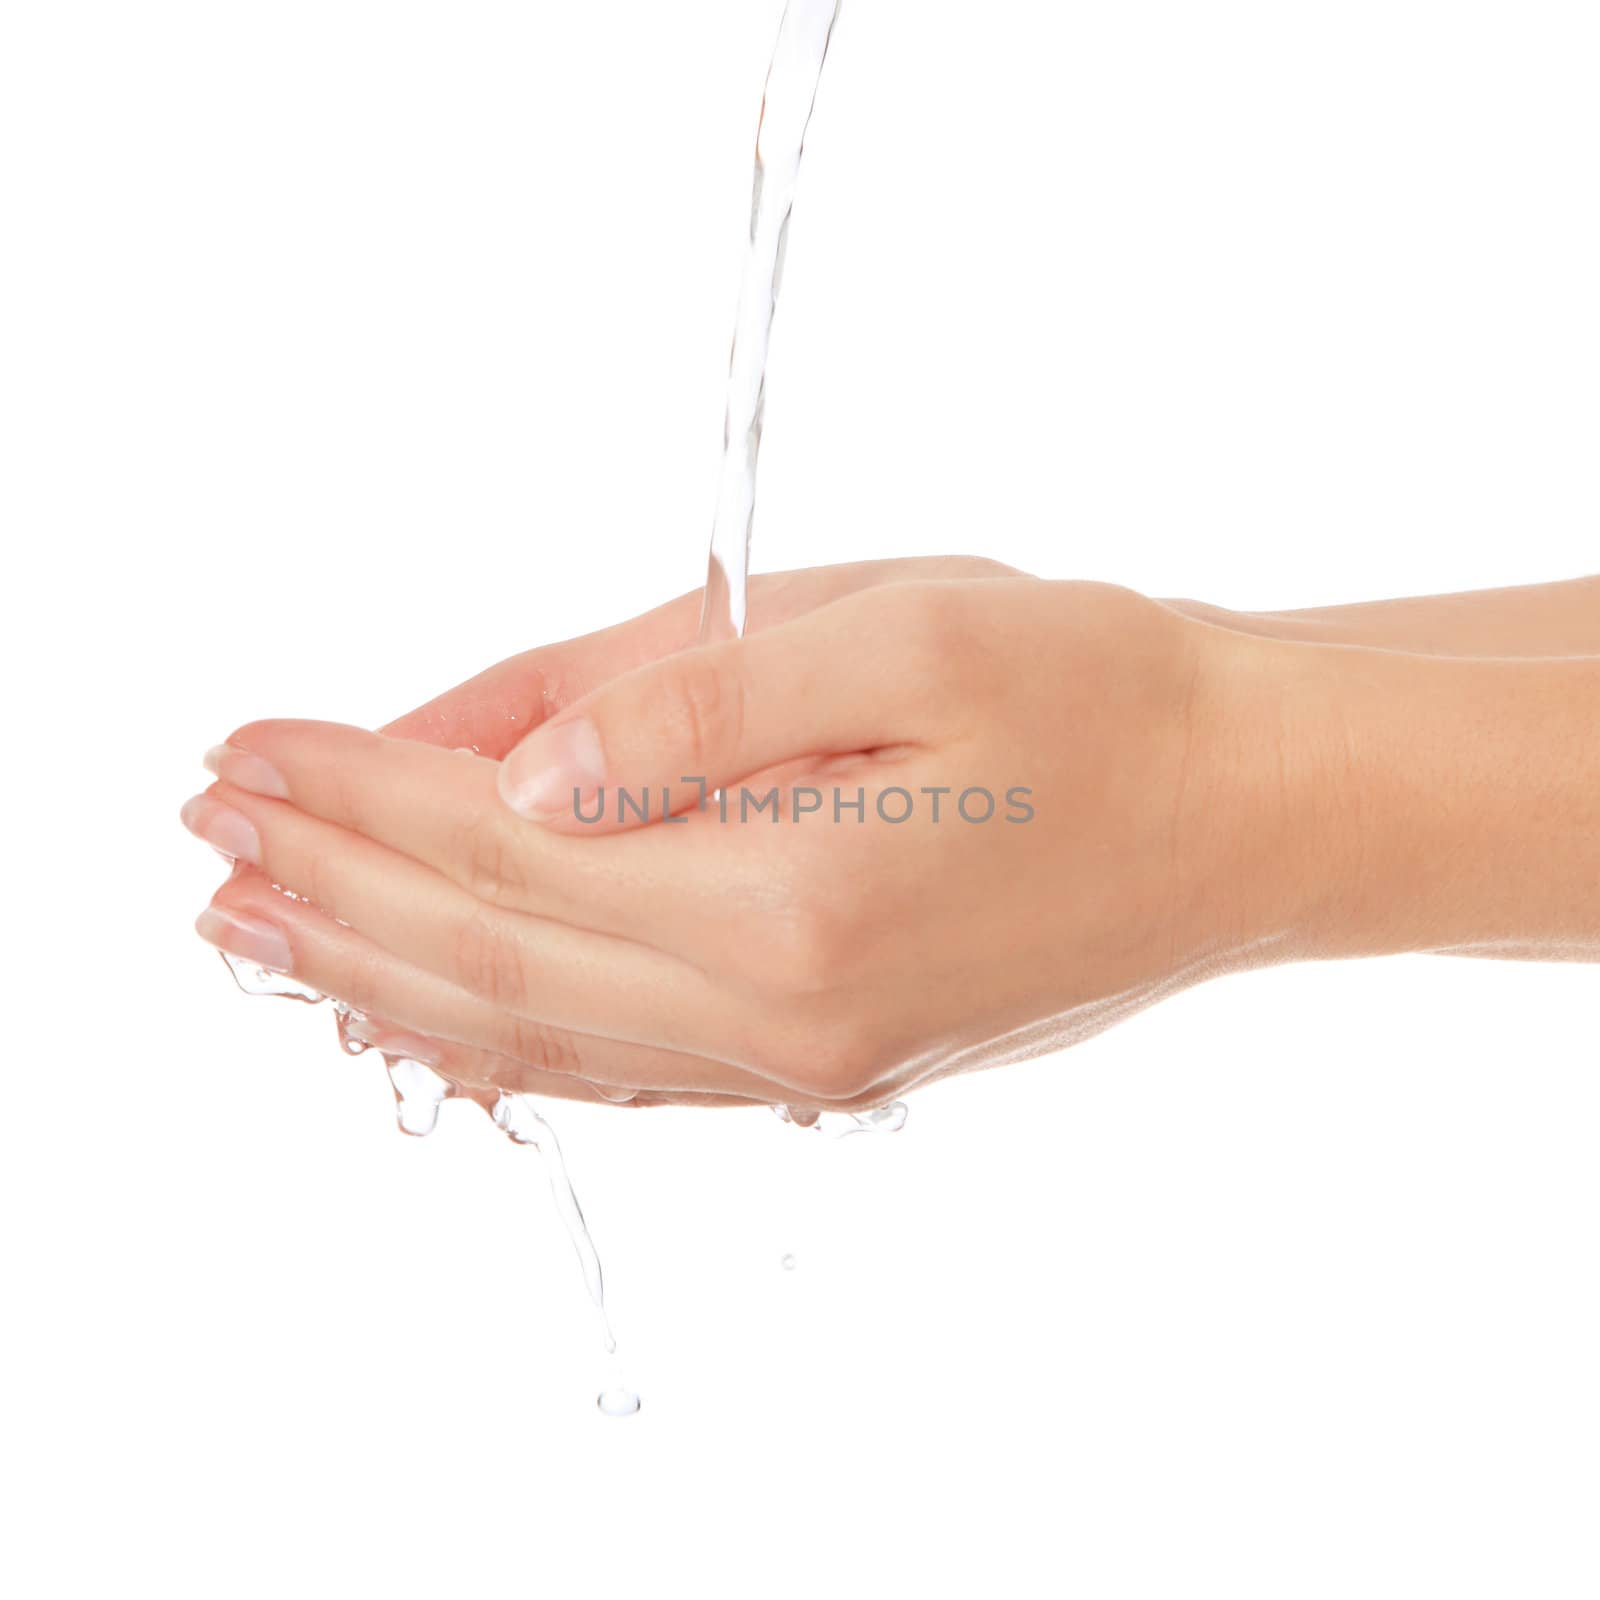 Female person washes her hands. All on white background.